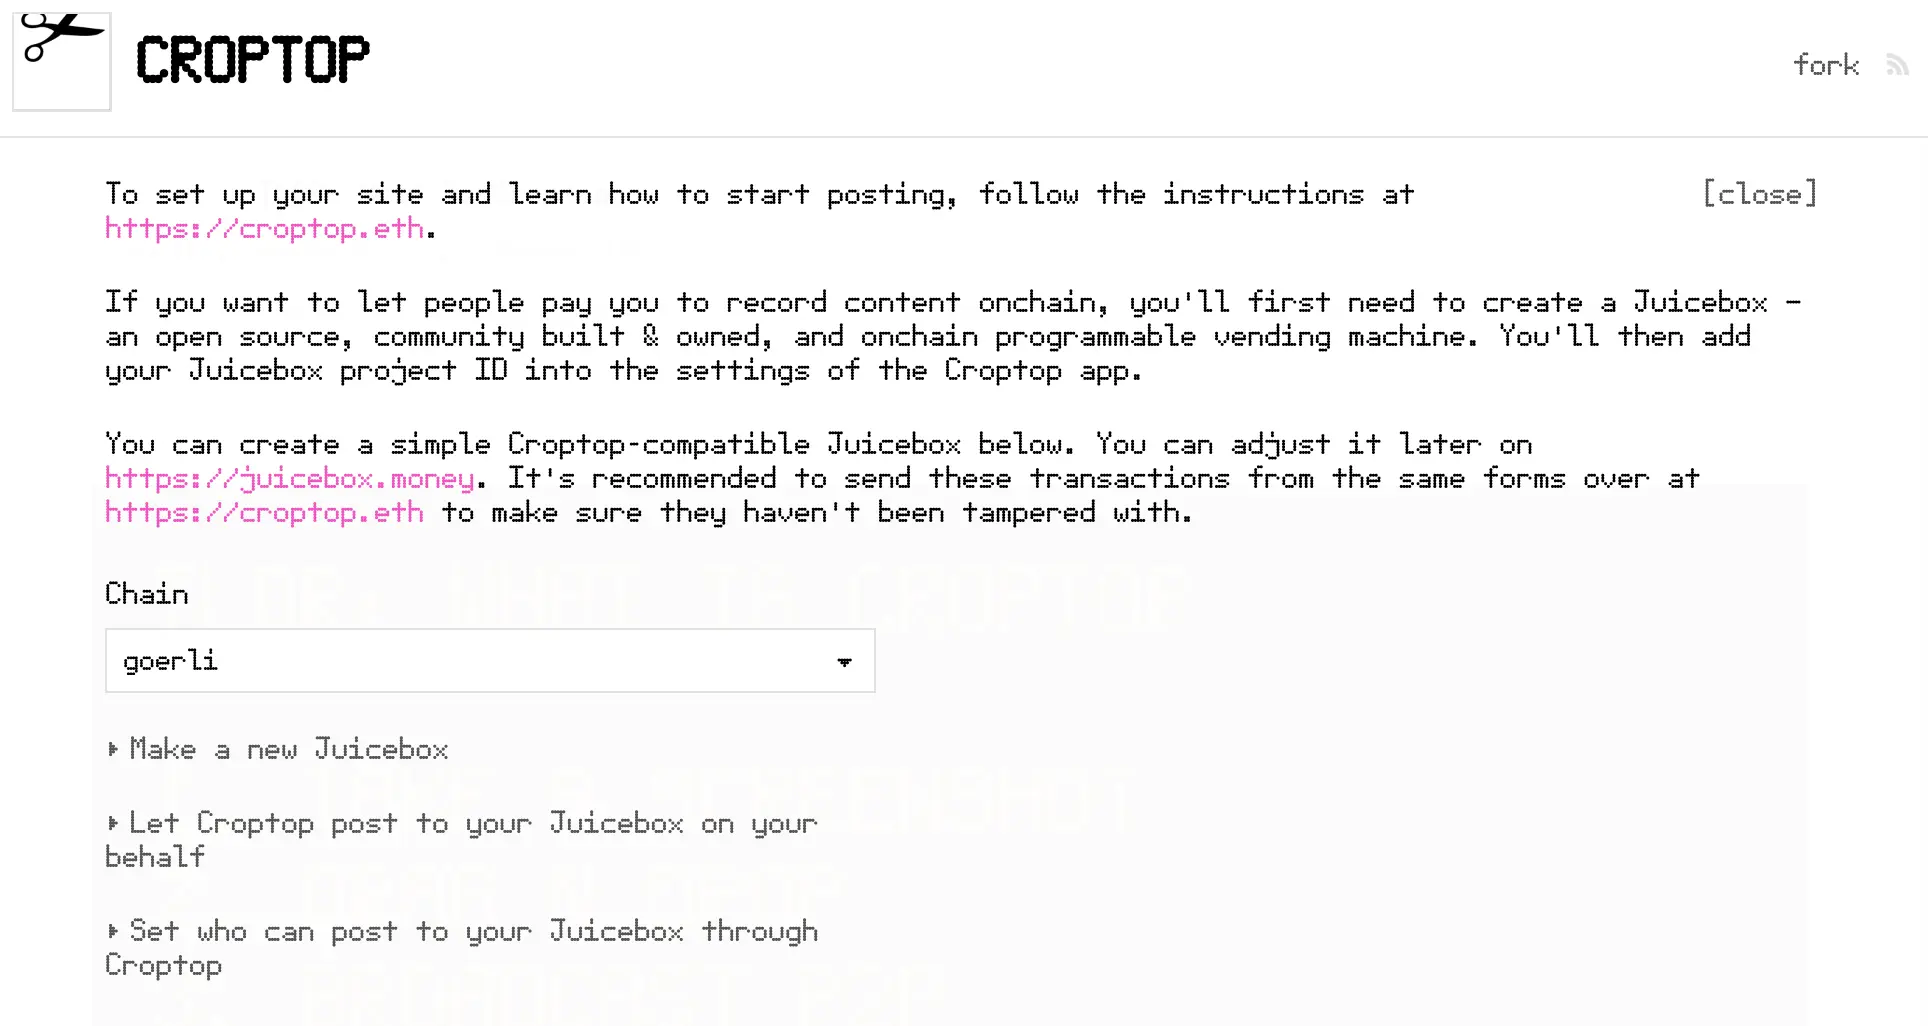 Croptop instructions for people to fork this fundraising solution